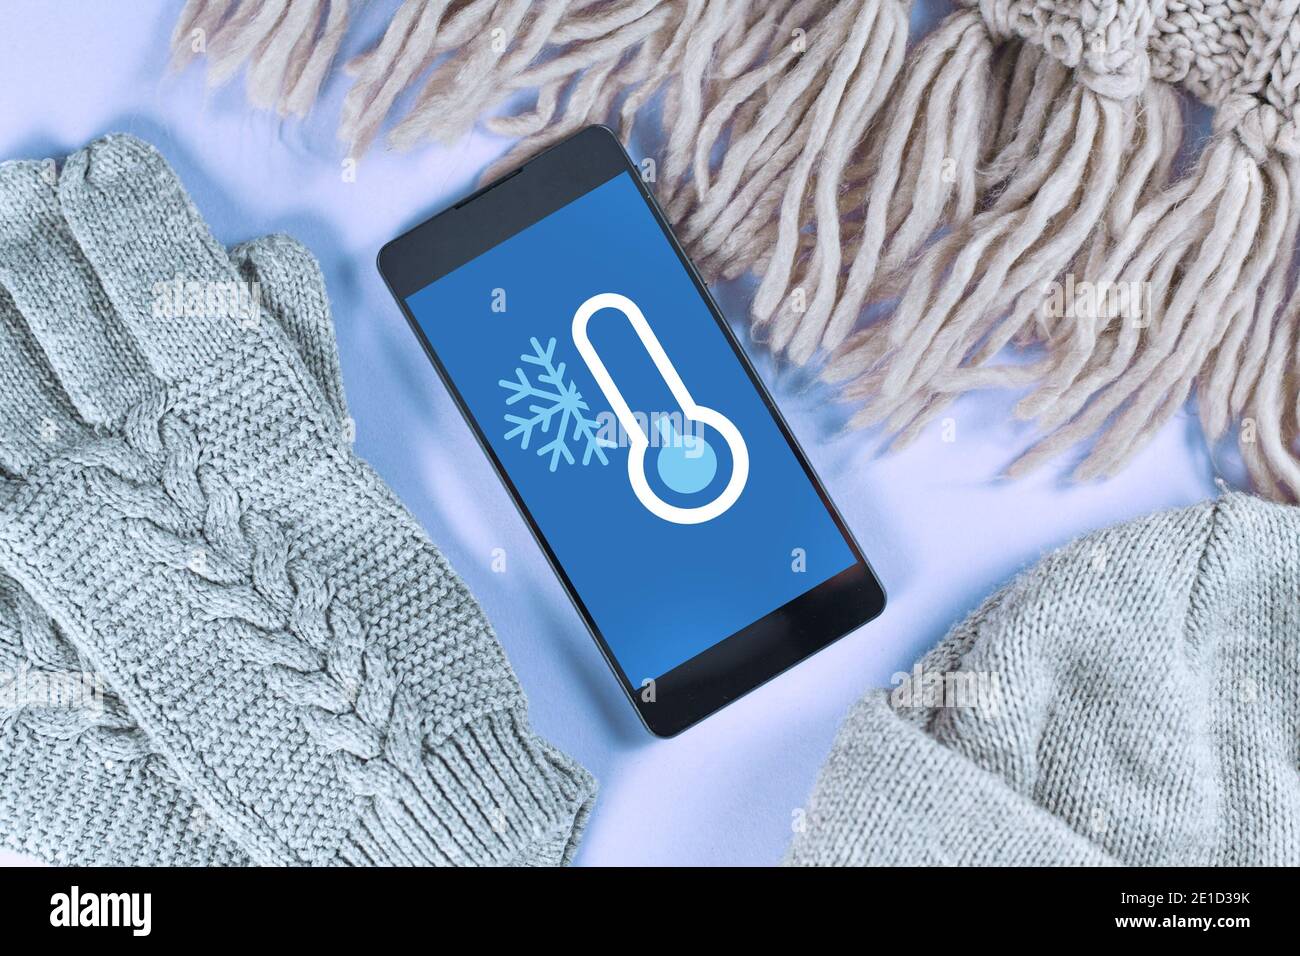 Concept for cold temperatures with snow and minus degrees with mobile phone showing weather forecast surrounded by warm winter clothes like scarf Stock Photo